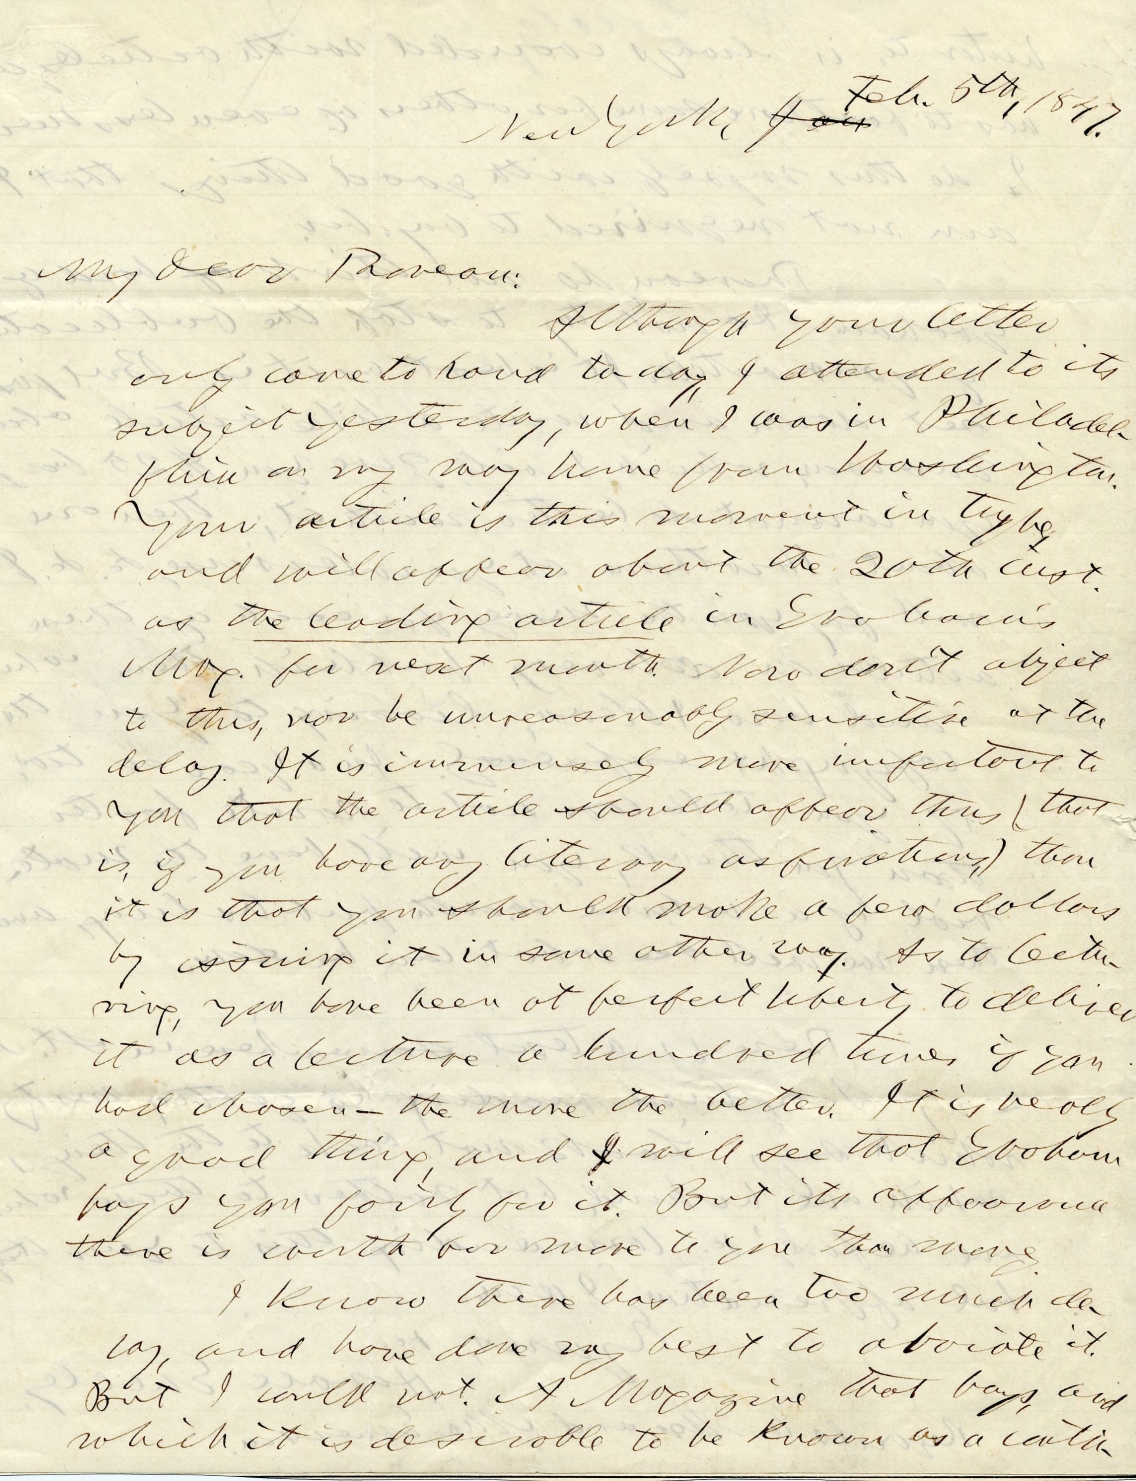 Letter from Horace Greeley  to Henry David Thoreau